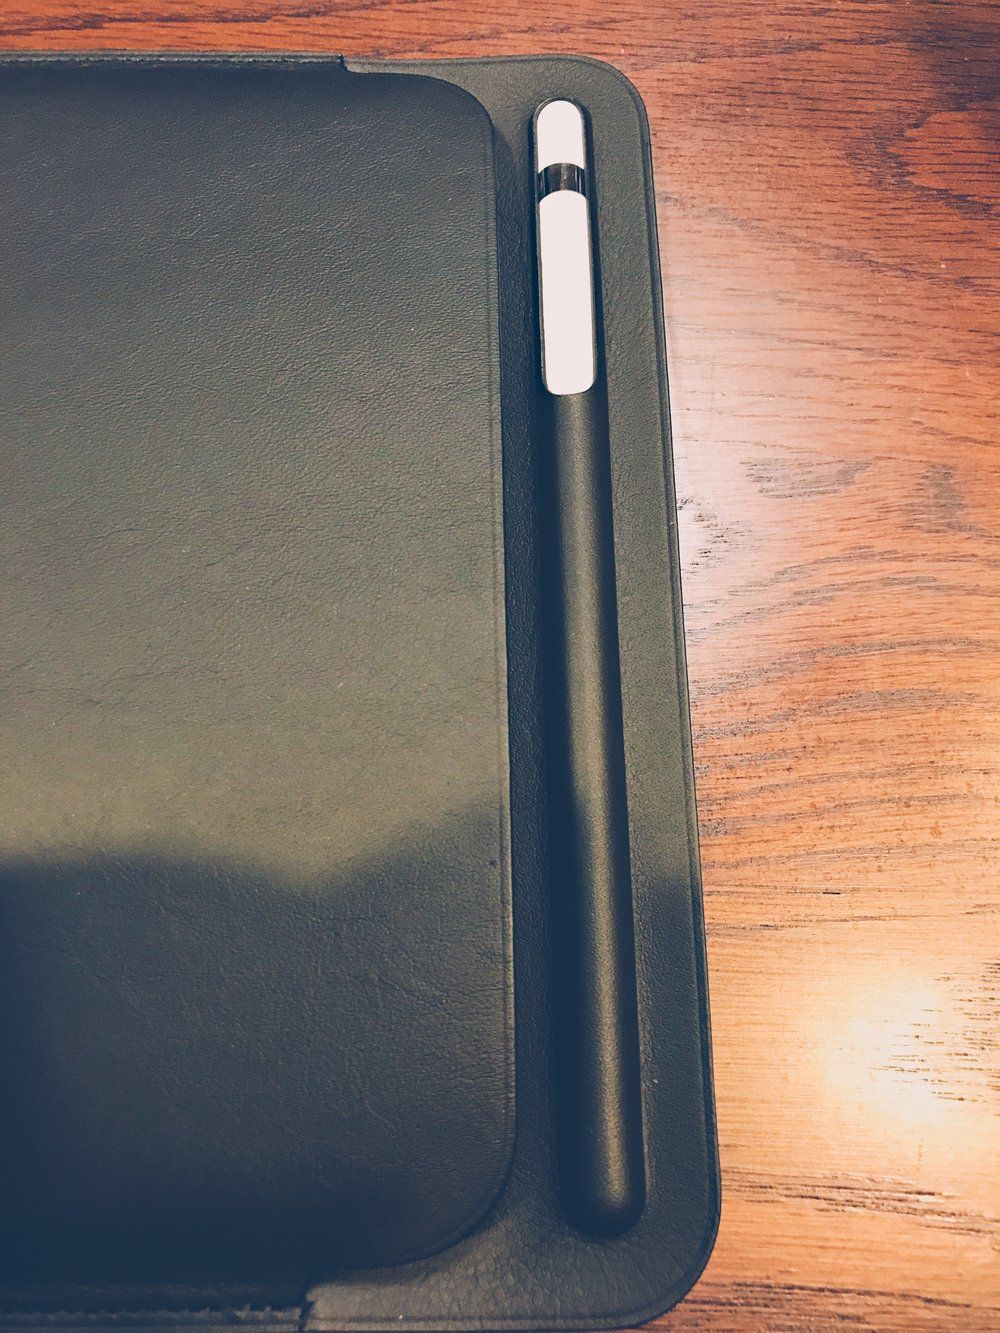 The Apple Pencil fits snugly in the case so it won’t fall out but it is still easy to remov